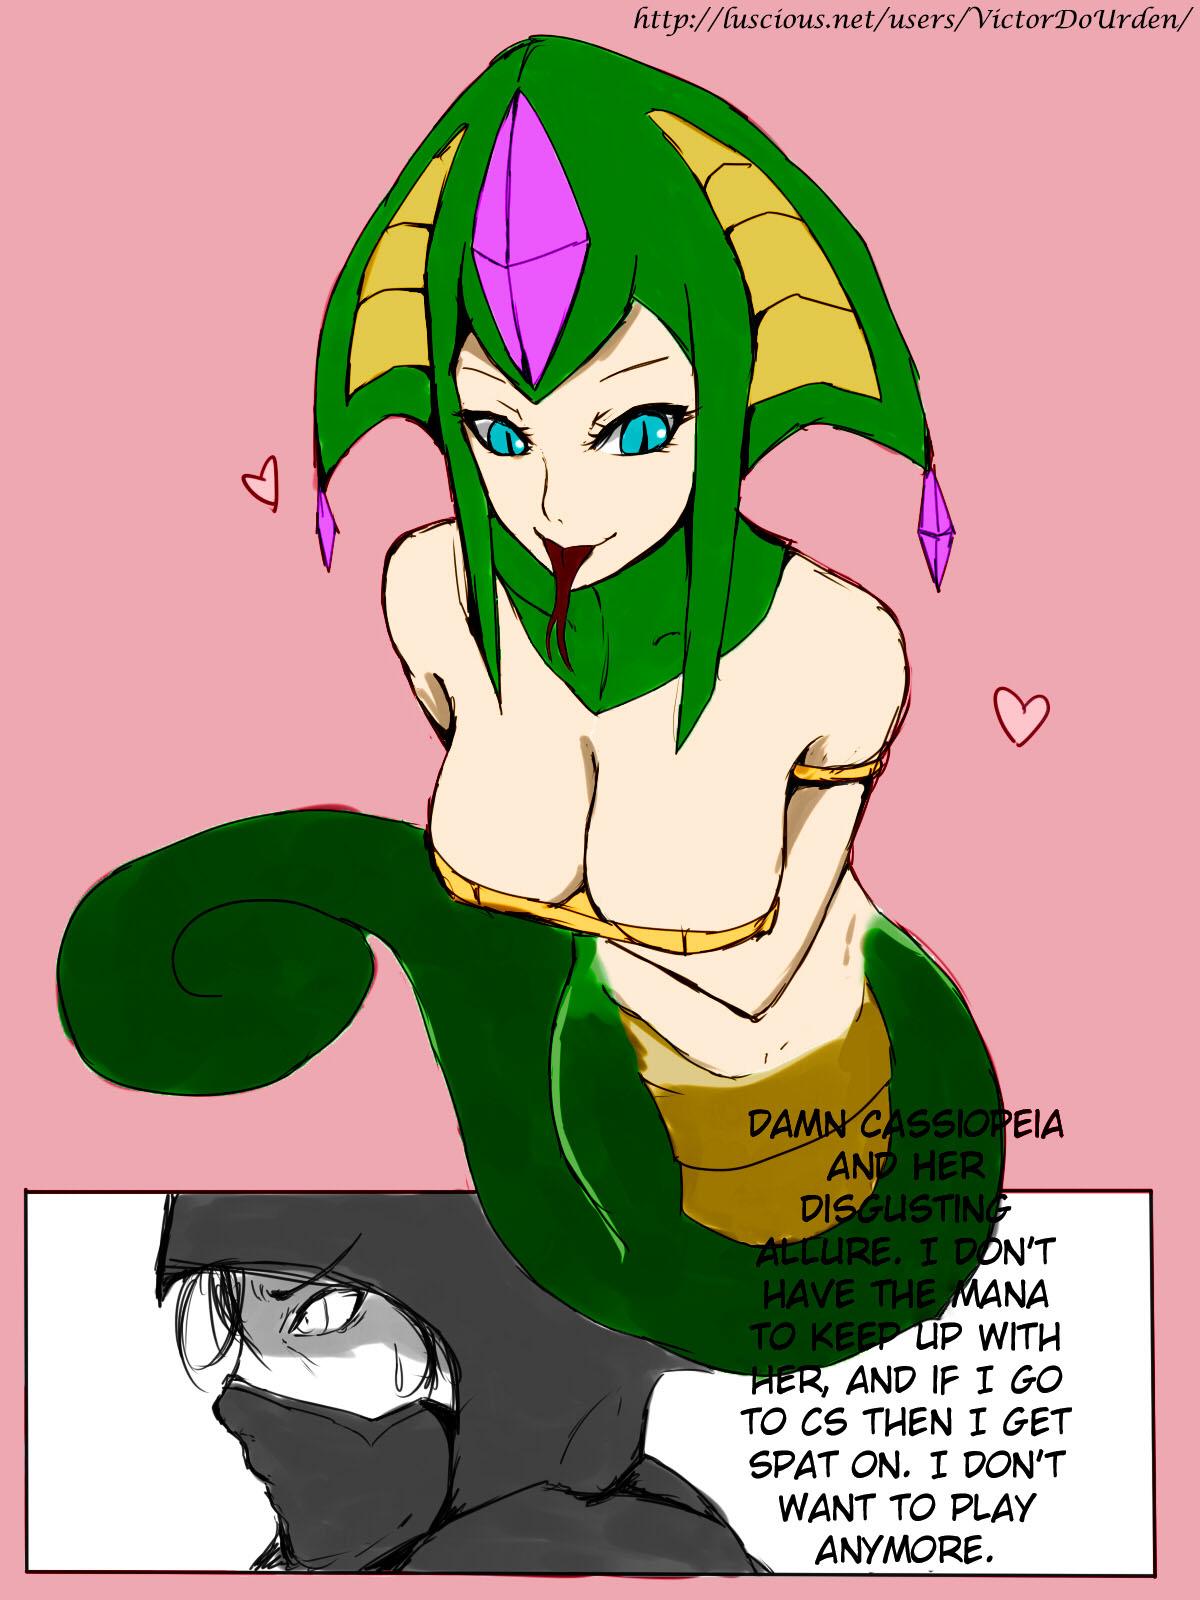 Anal Licking Love Of Lamia - League of legends Jocks - Page 2